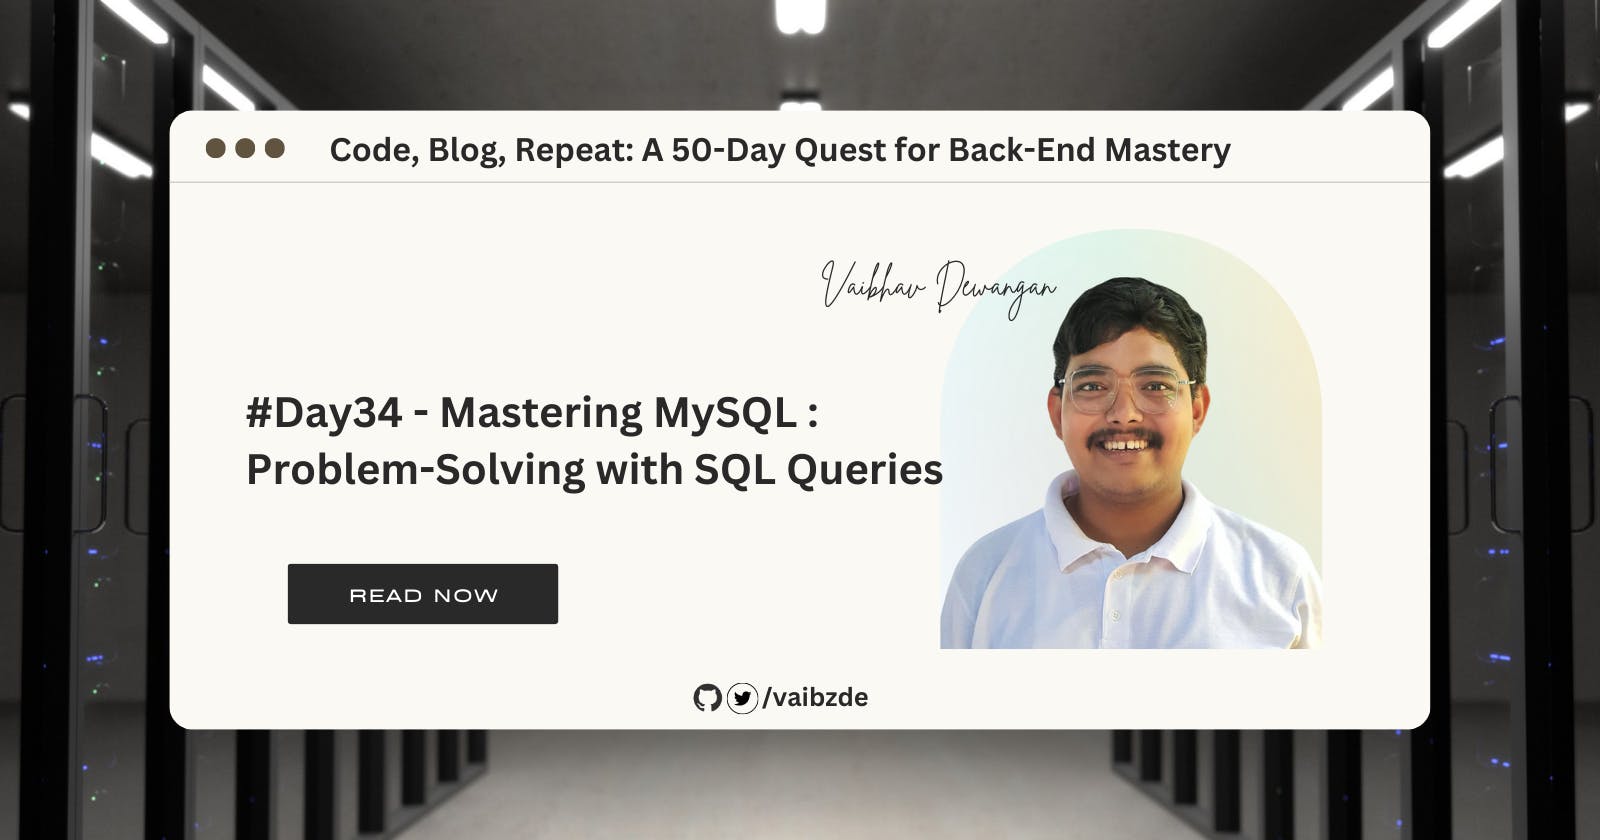 #Day34 - Mastering MySQL: Problem-Solving with SQL Queries